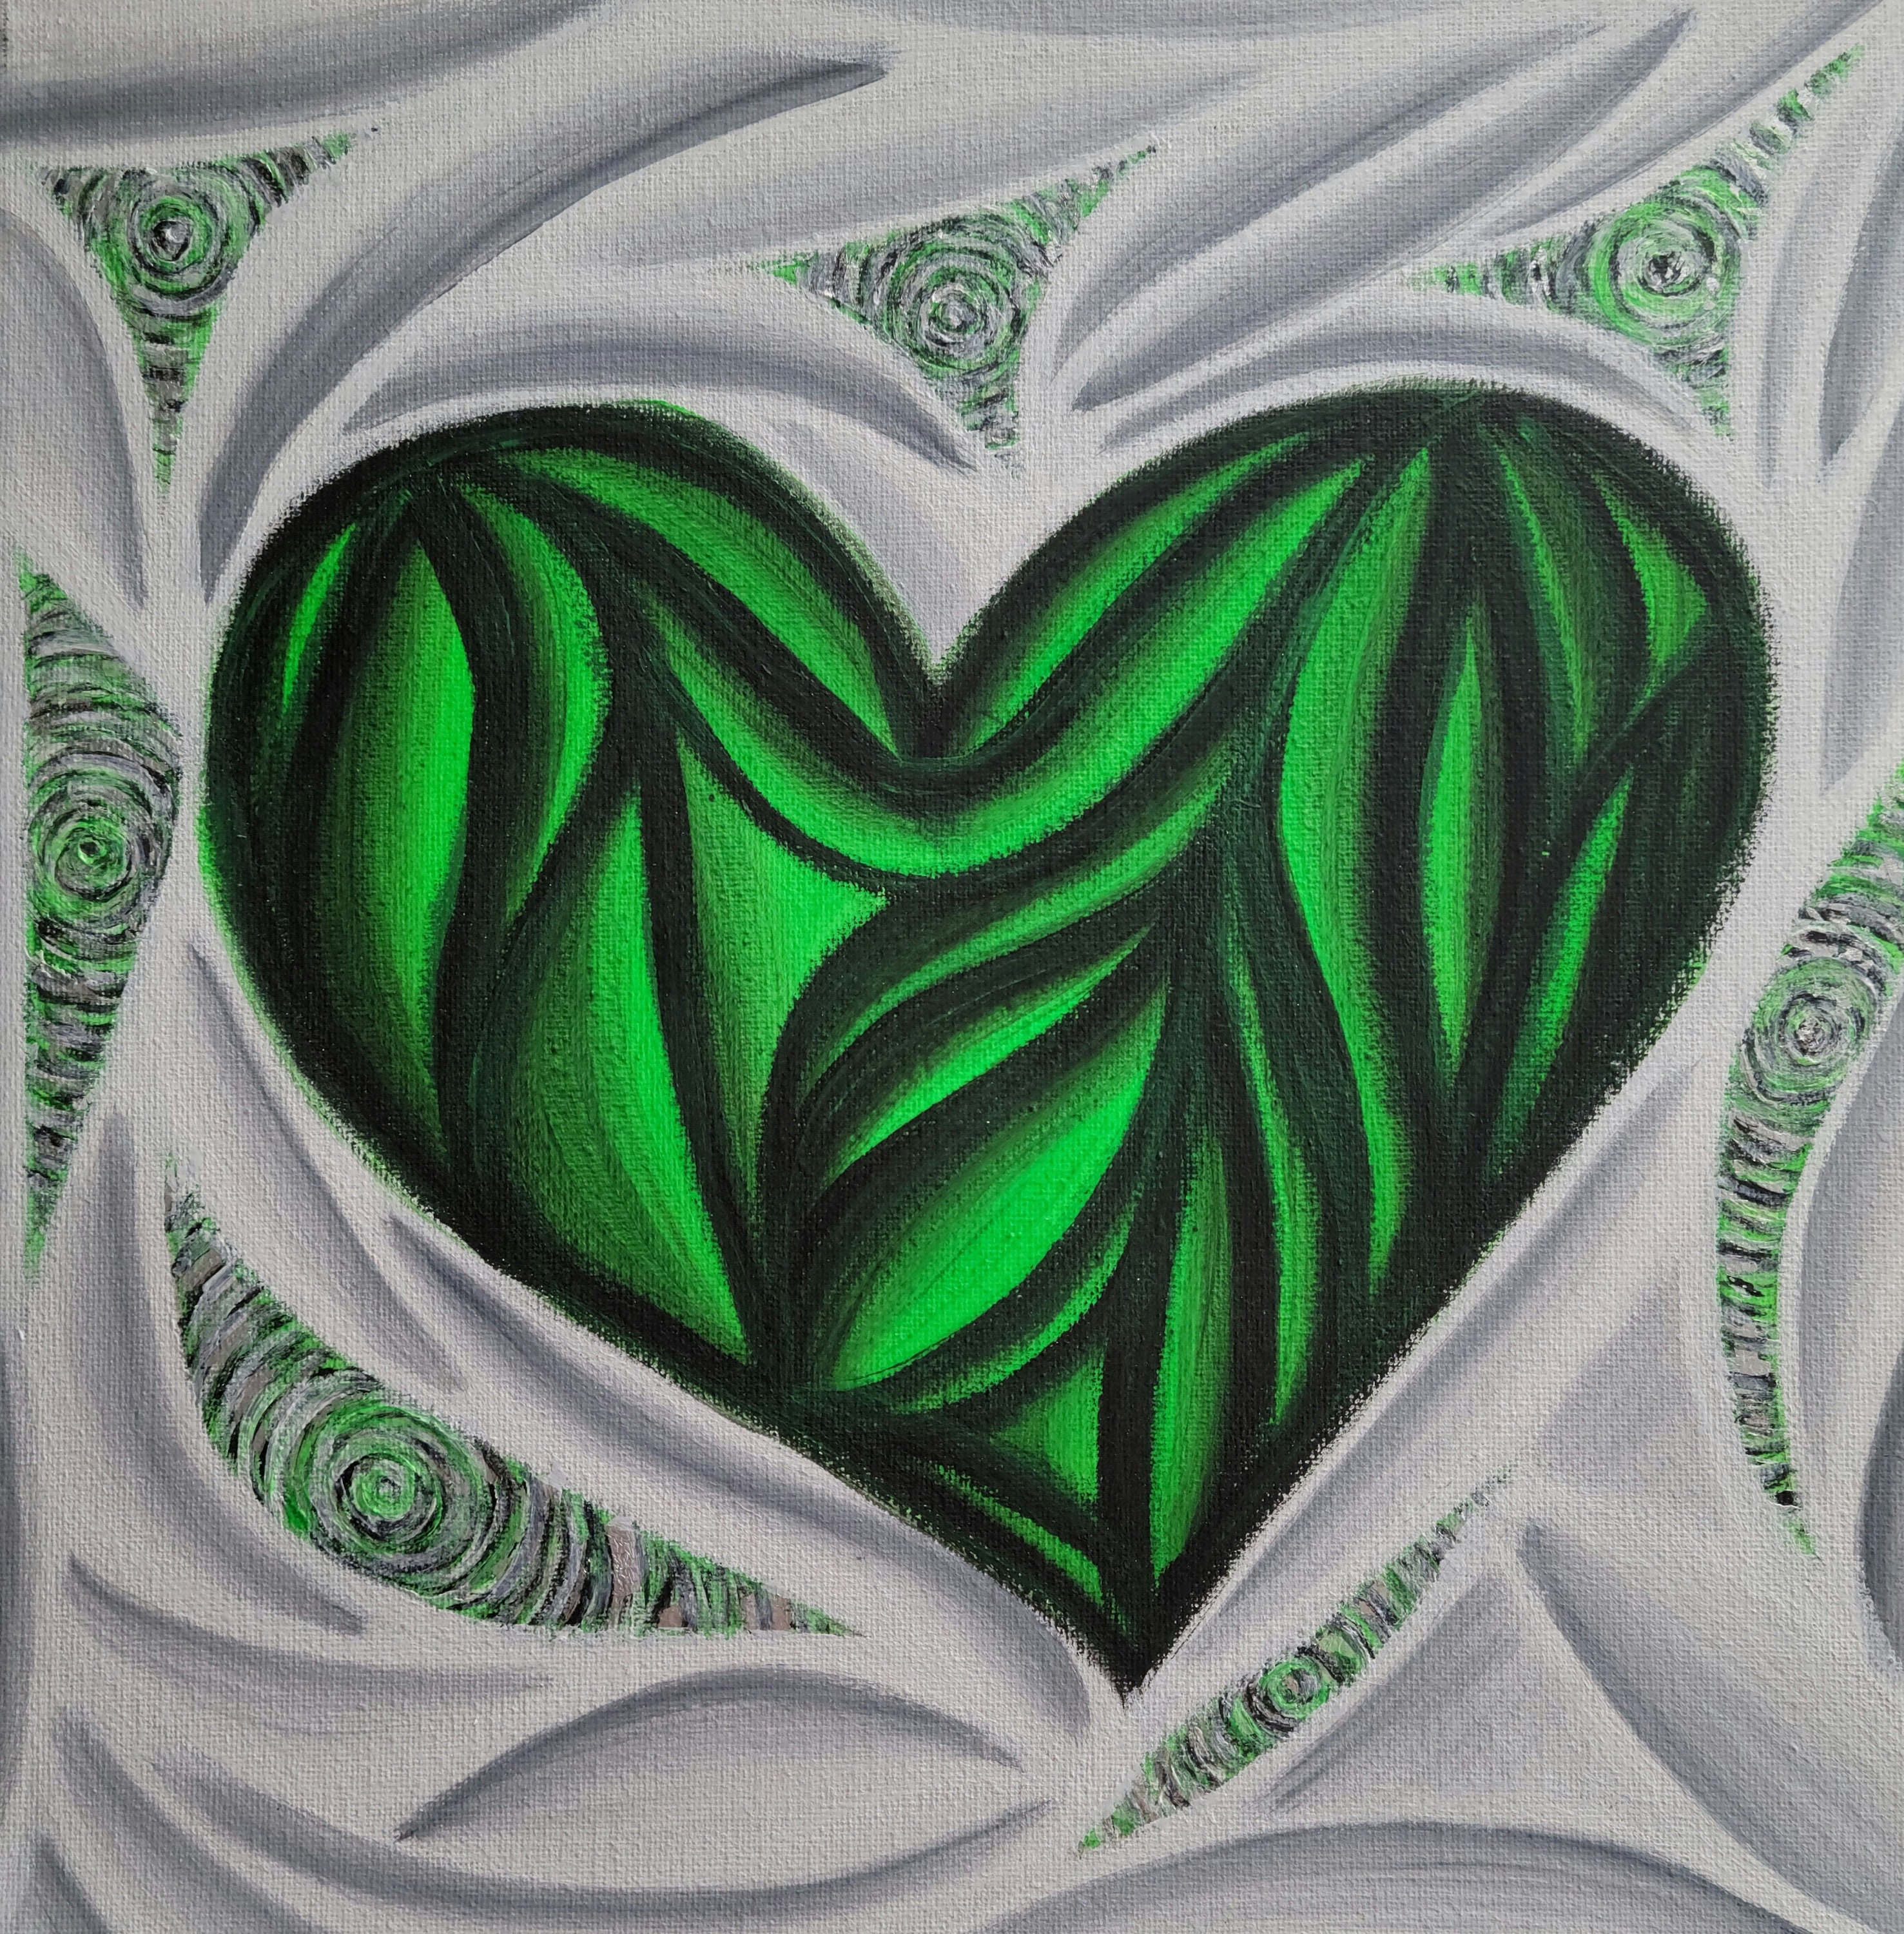 Original Hand Painted Colorful Green Heart Pop Art Acrylic Painting 12x12  Inch Canvas Neon Green Black White